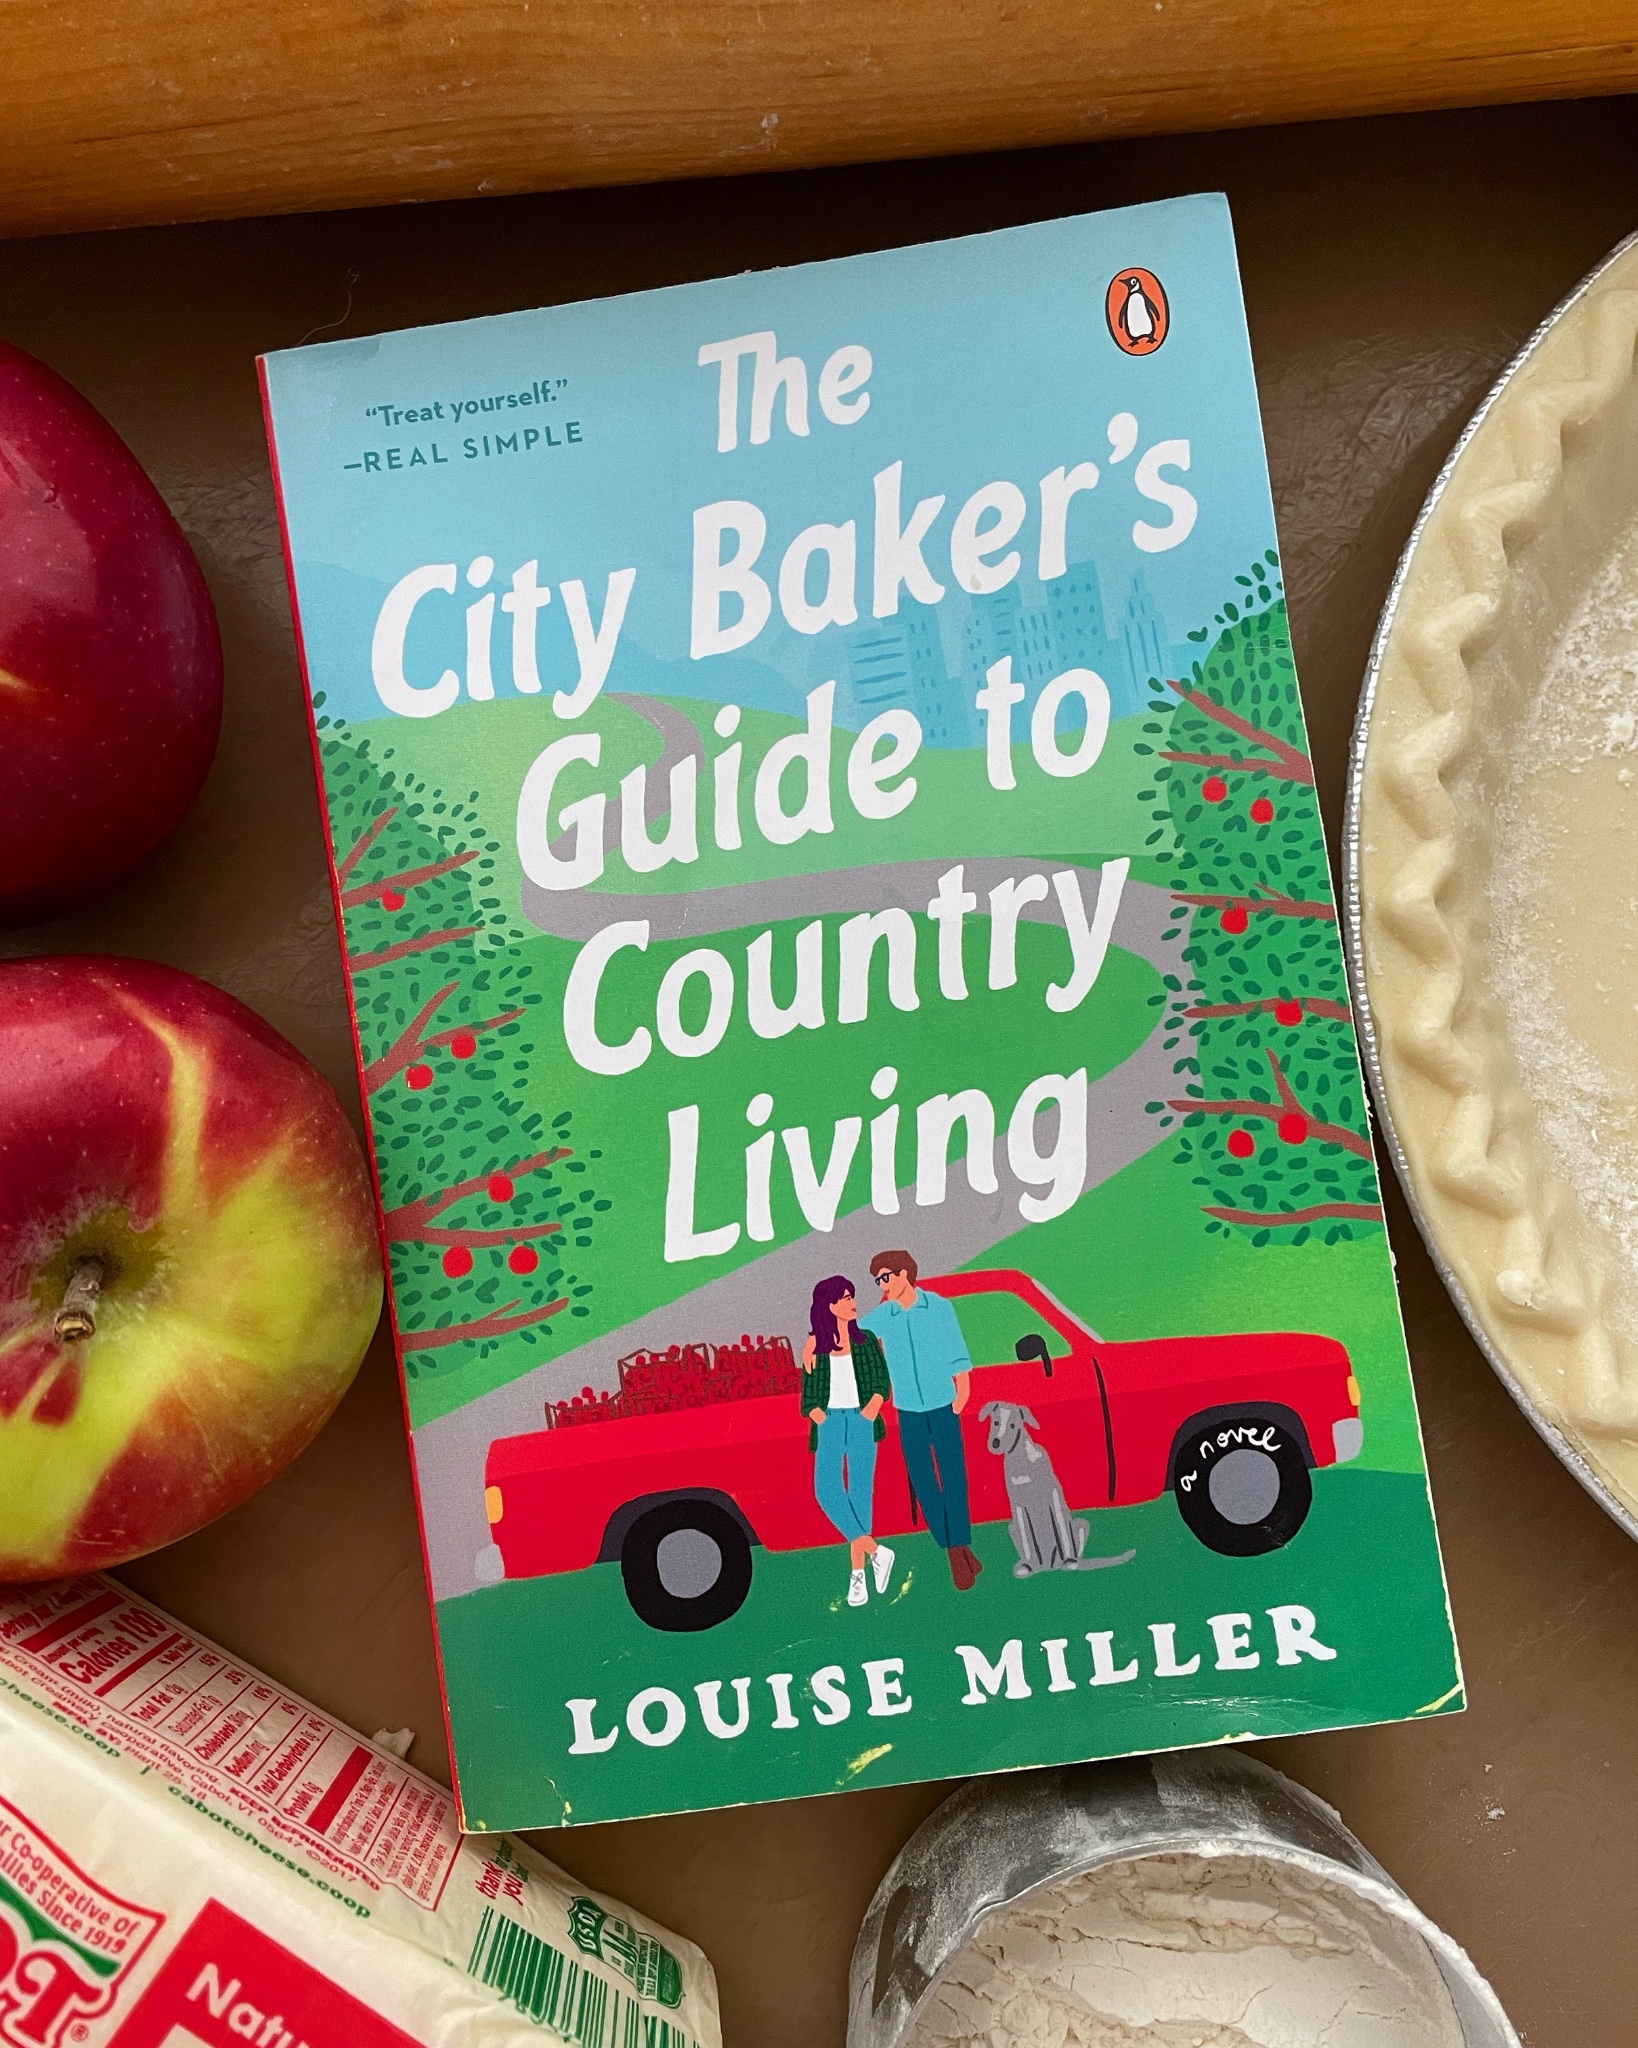 The City Baker's Guide to Country Living: A Novel